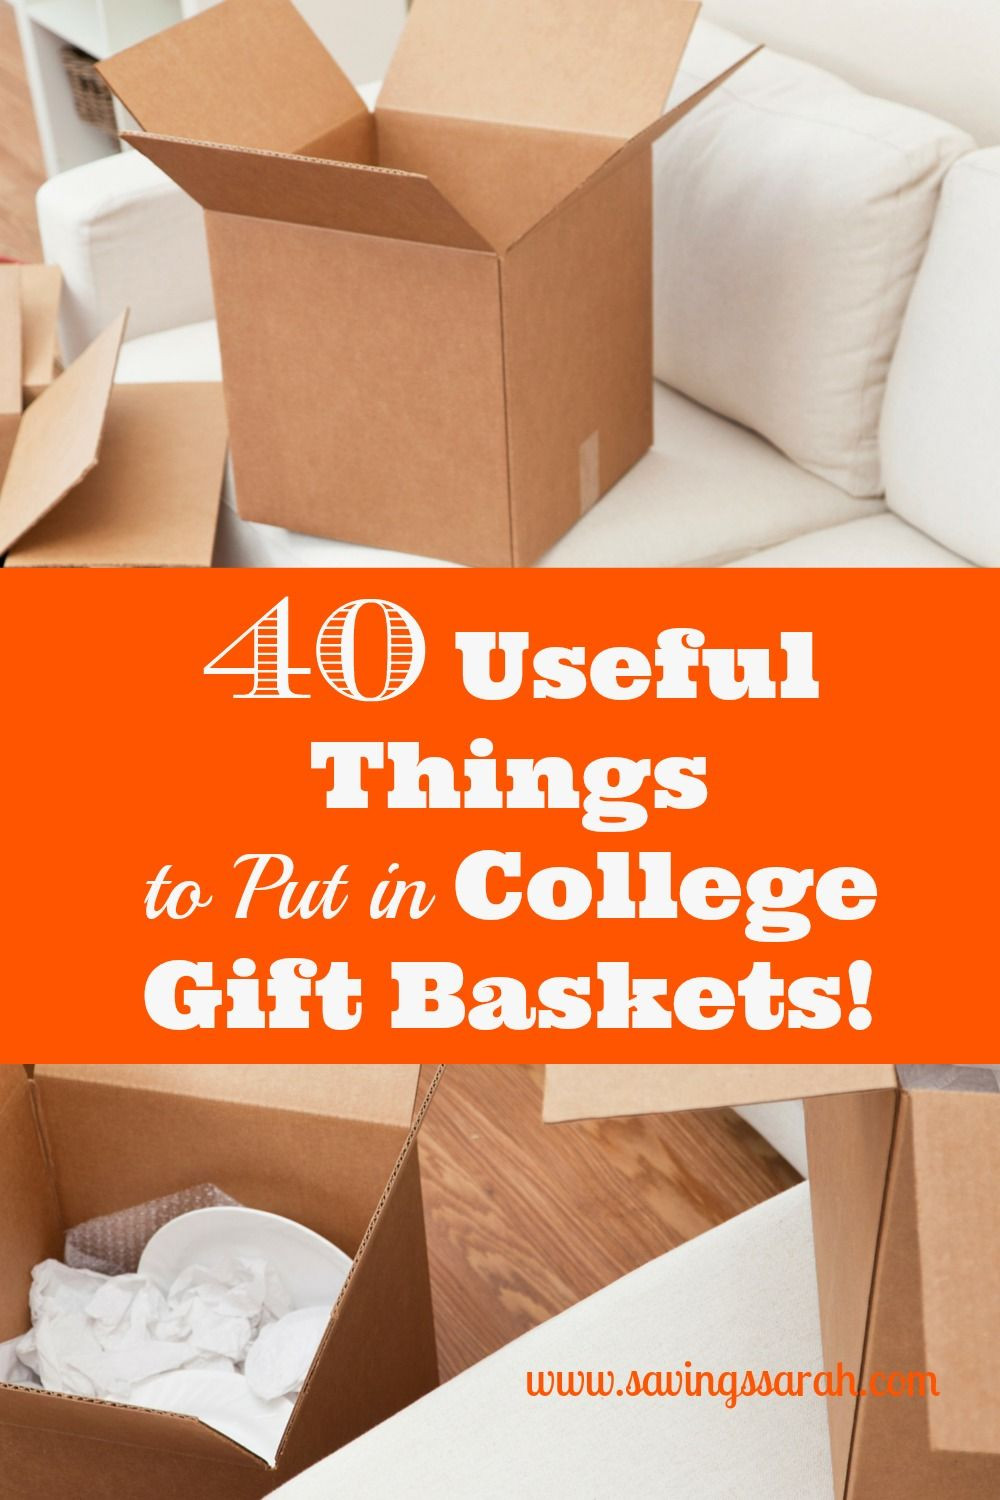 Off To College Gift Basket Ideas
 40 Useful Things to Put in College Gift Baskets